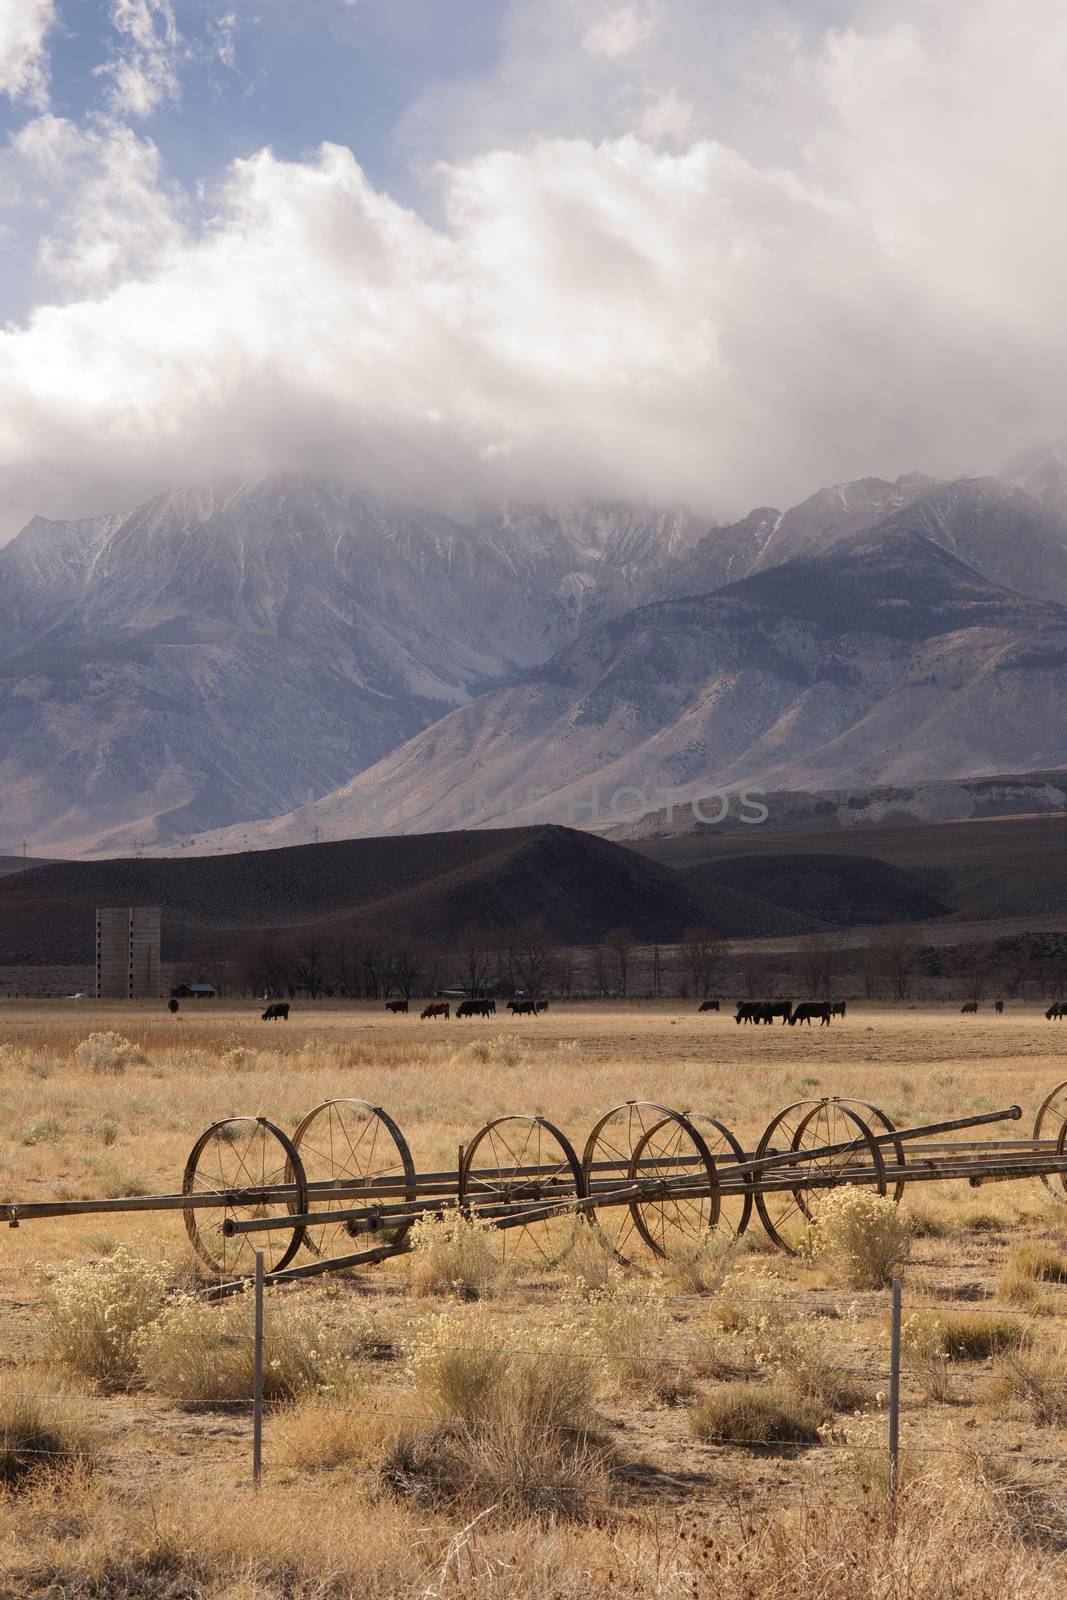 Owen's Vally Sierra Neveda Mountains Livestock Cattle Ranch by ChrisBoswell